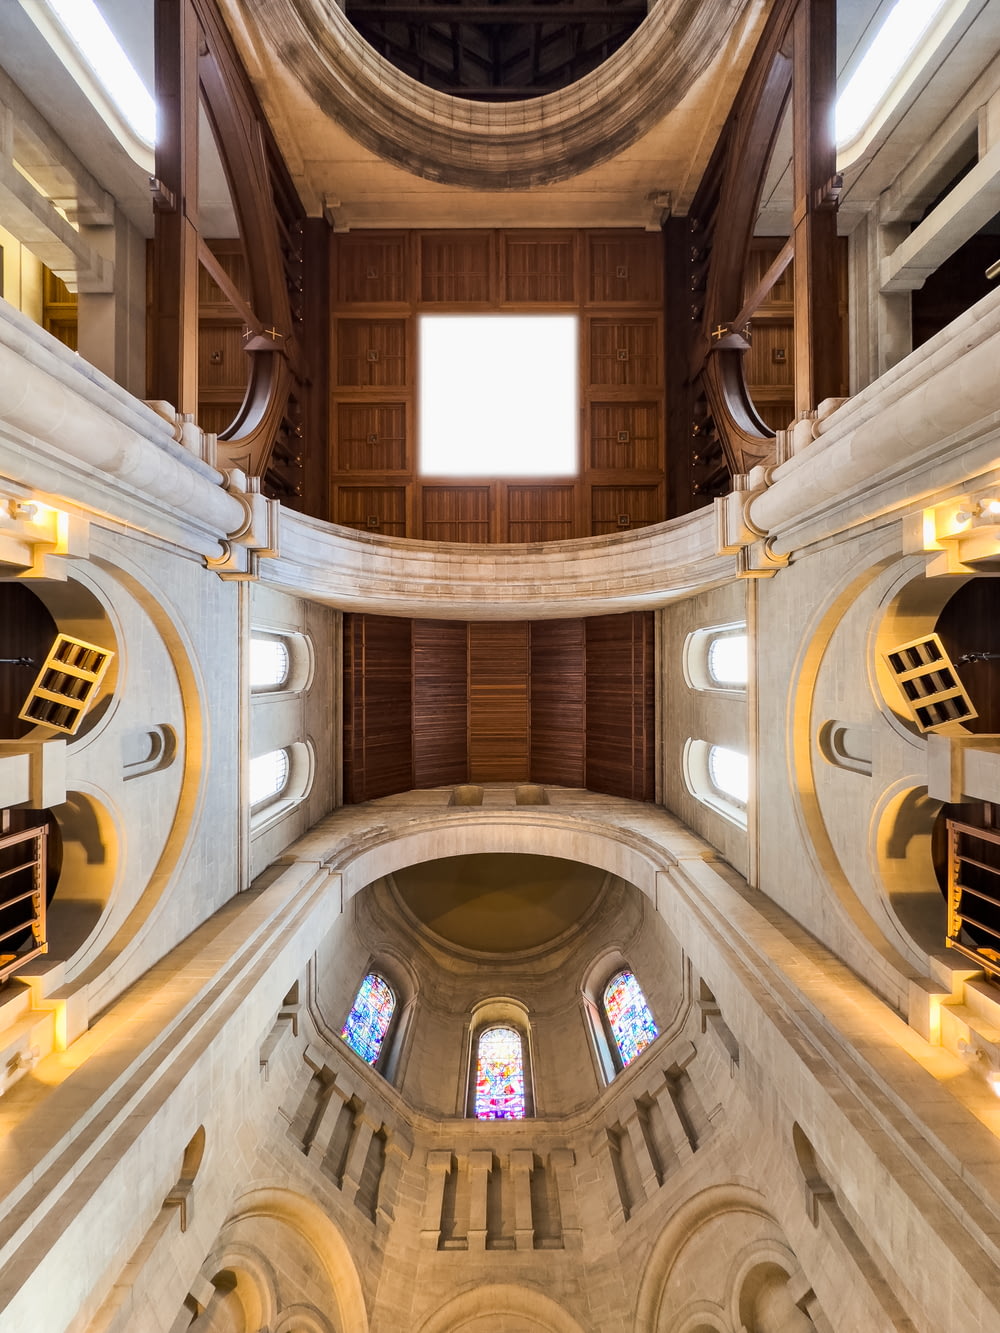 a view of the inside of a church looking up at the ceiling